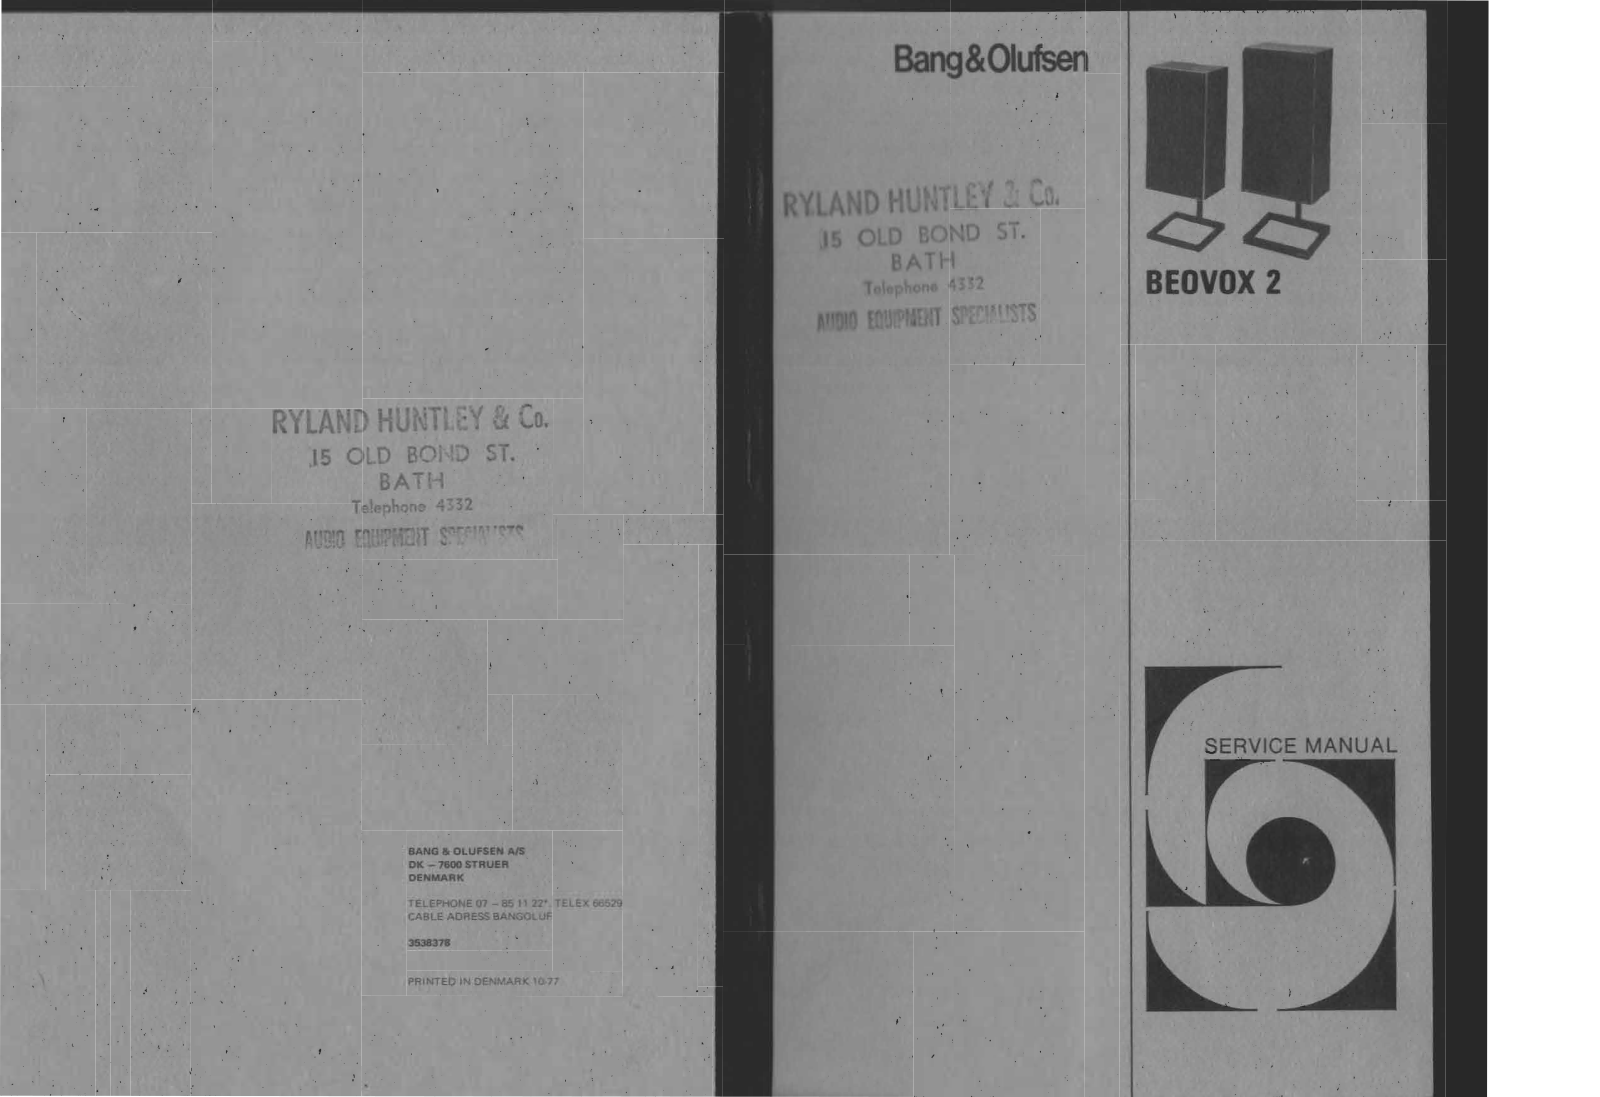 Bang and Olufsen Beovox M-100.2, Beovox M-100 Service manual